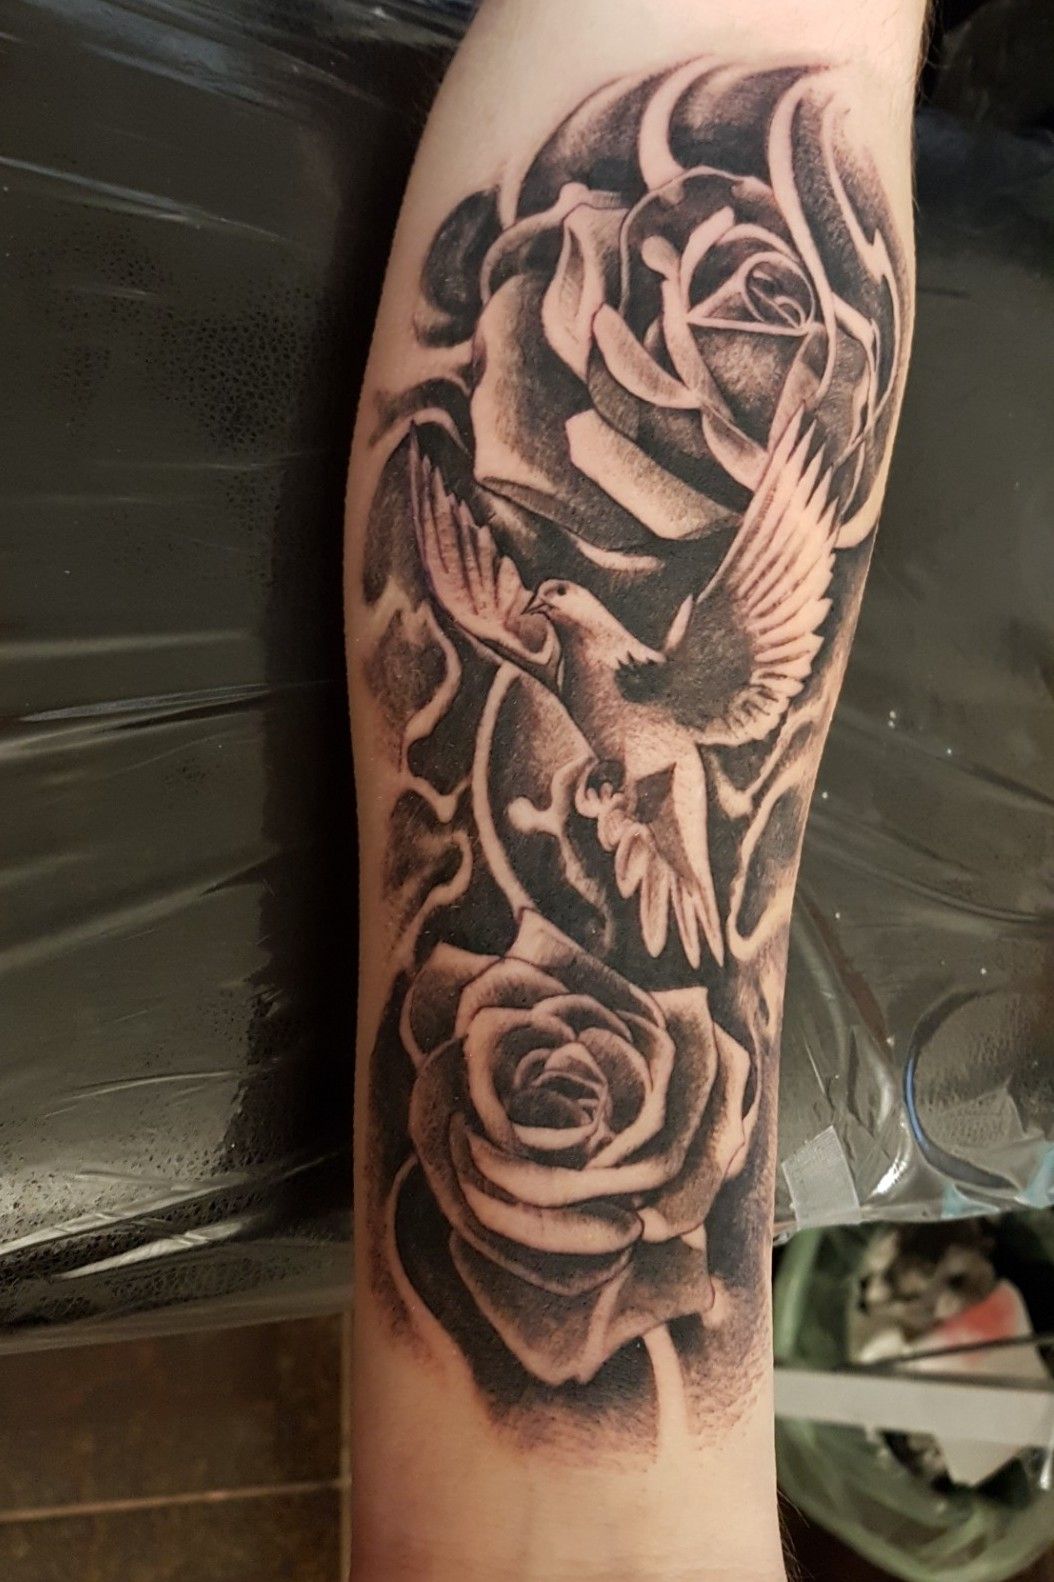 Tattoo uploaded by Leo Abdul • Dove and roses tattoo. #dovetattoo  #rosestattoo #blackandgreytattoo • Tattoodo